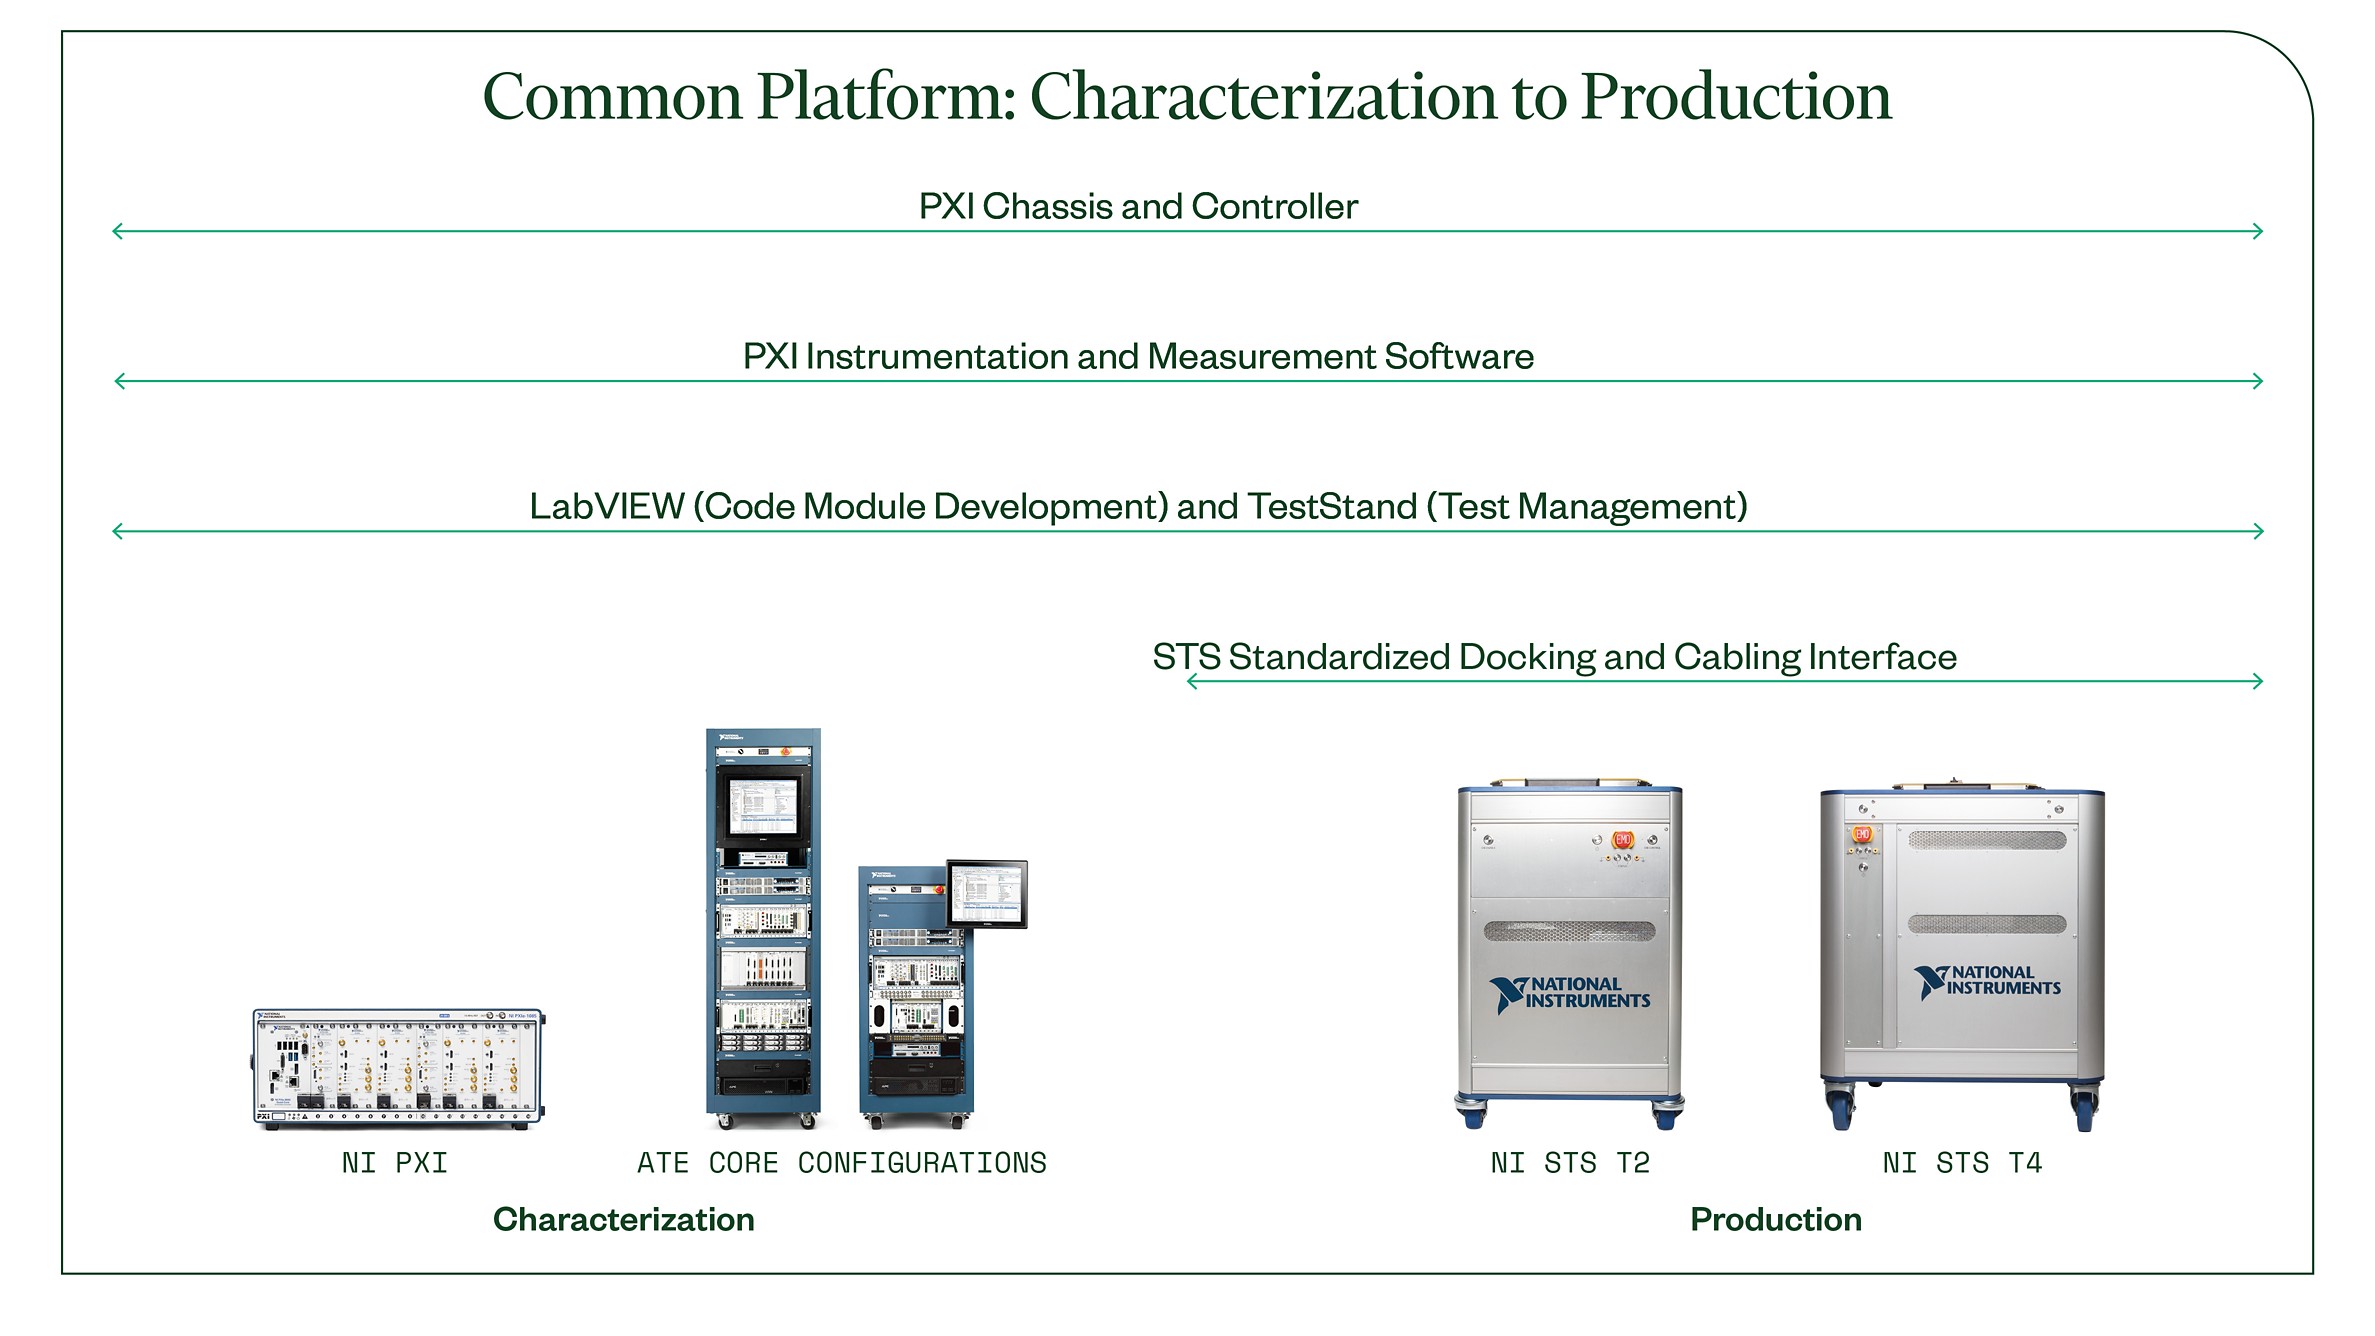 Common Platform from Characterization to Production 